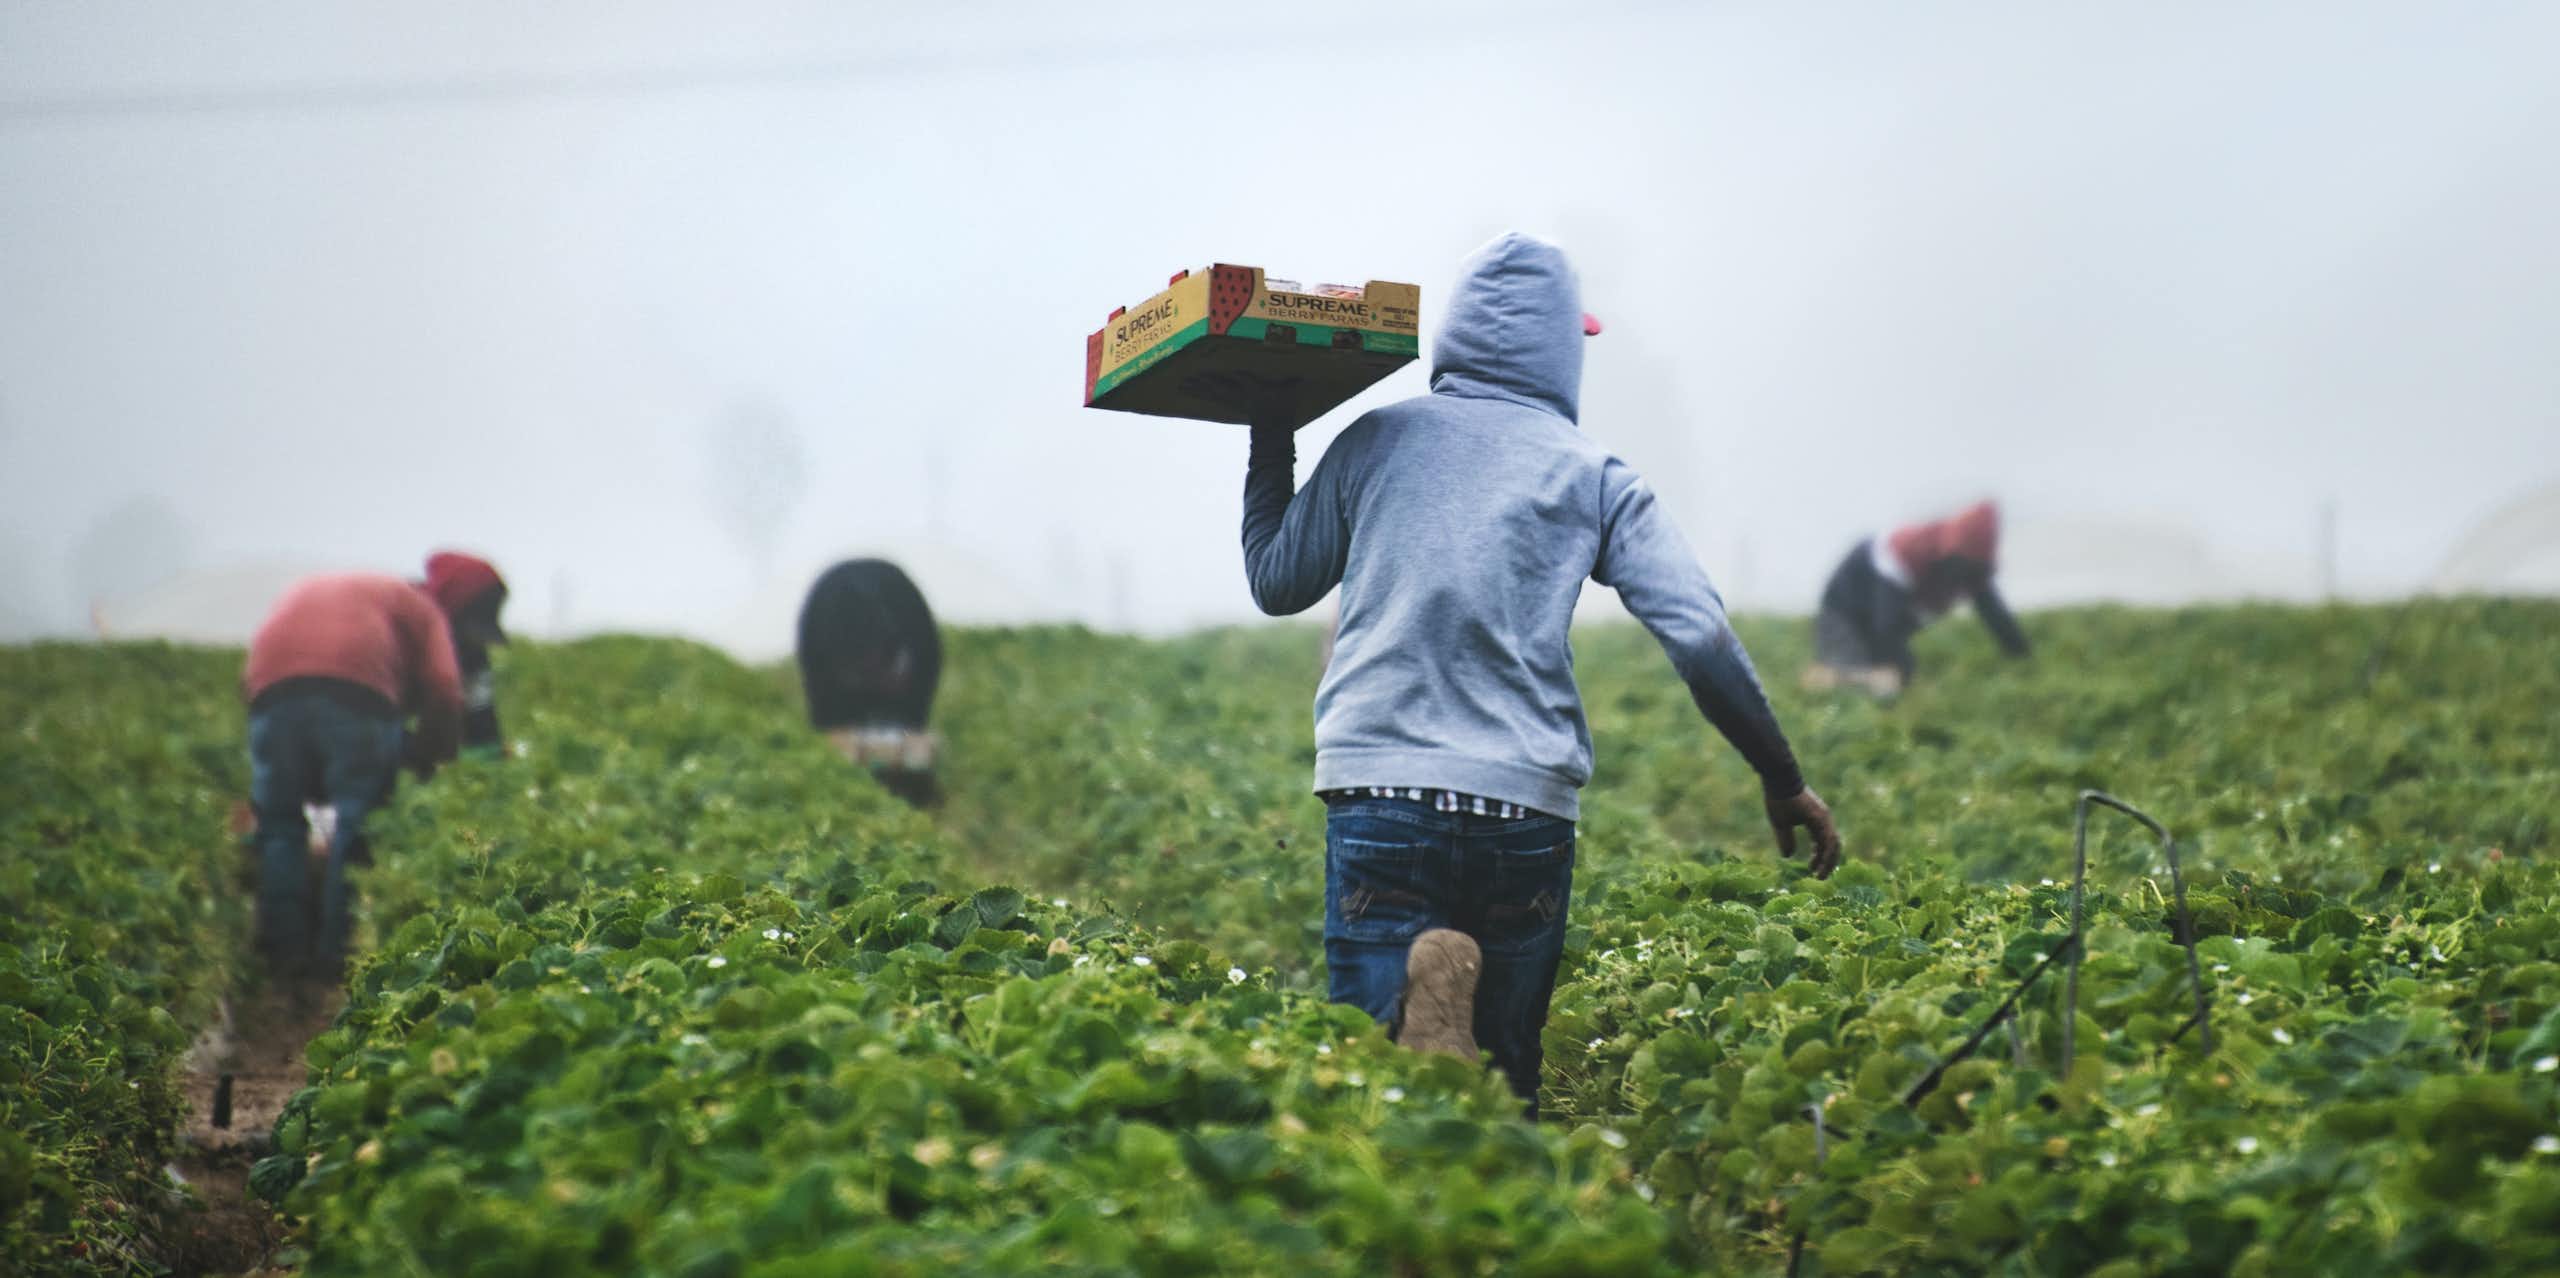 A picture of a farm workers harvesting. There are four people in the background hunched down over the crop. There is one person in the foreground in the middle walking with a box